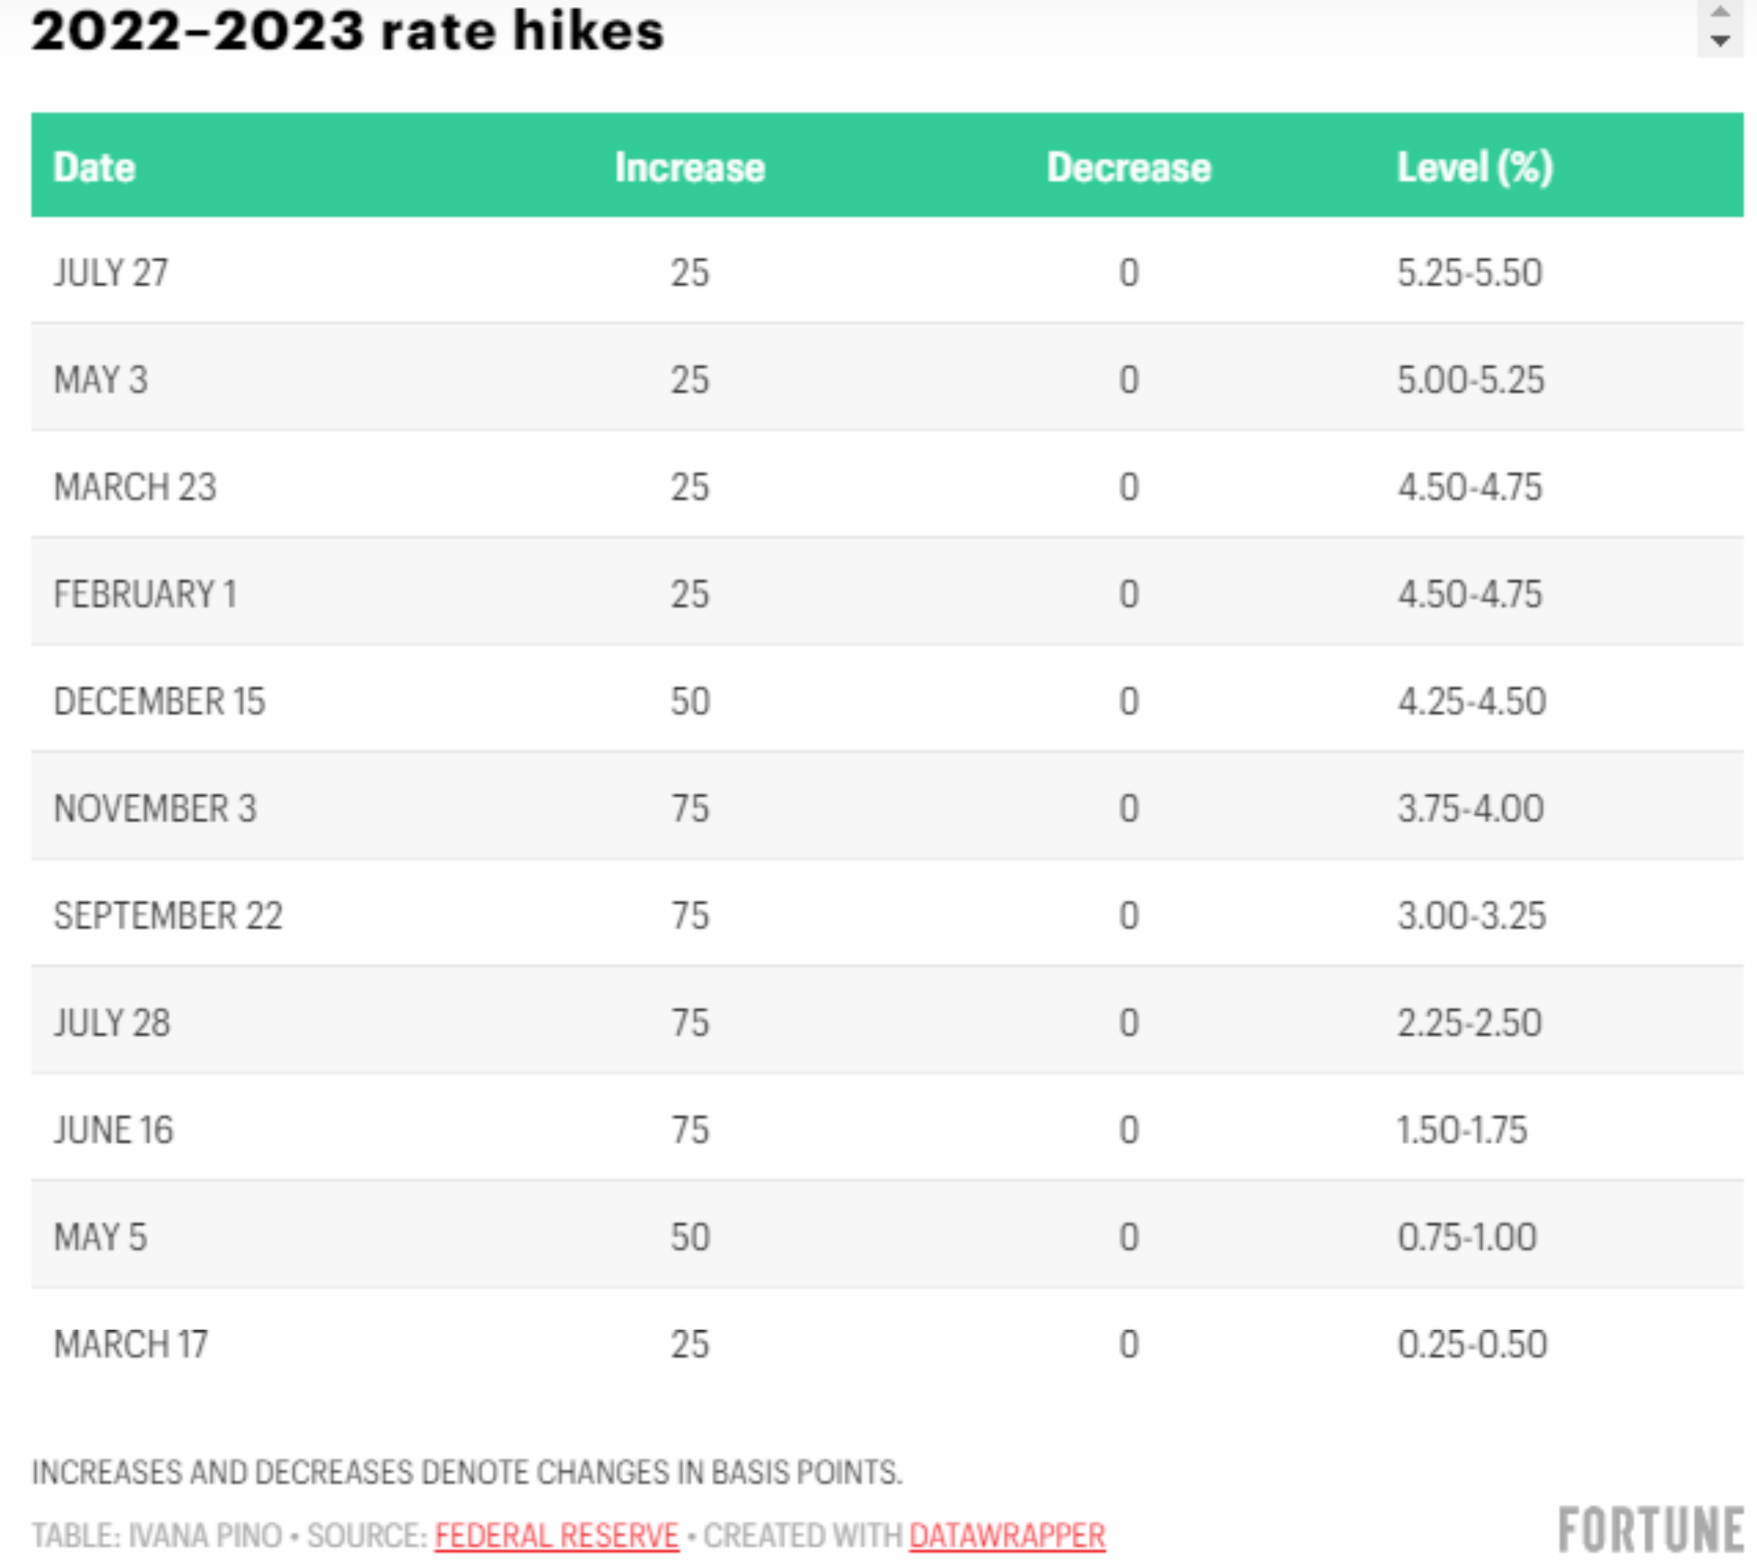 Rate Hikes 22-23